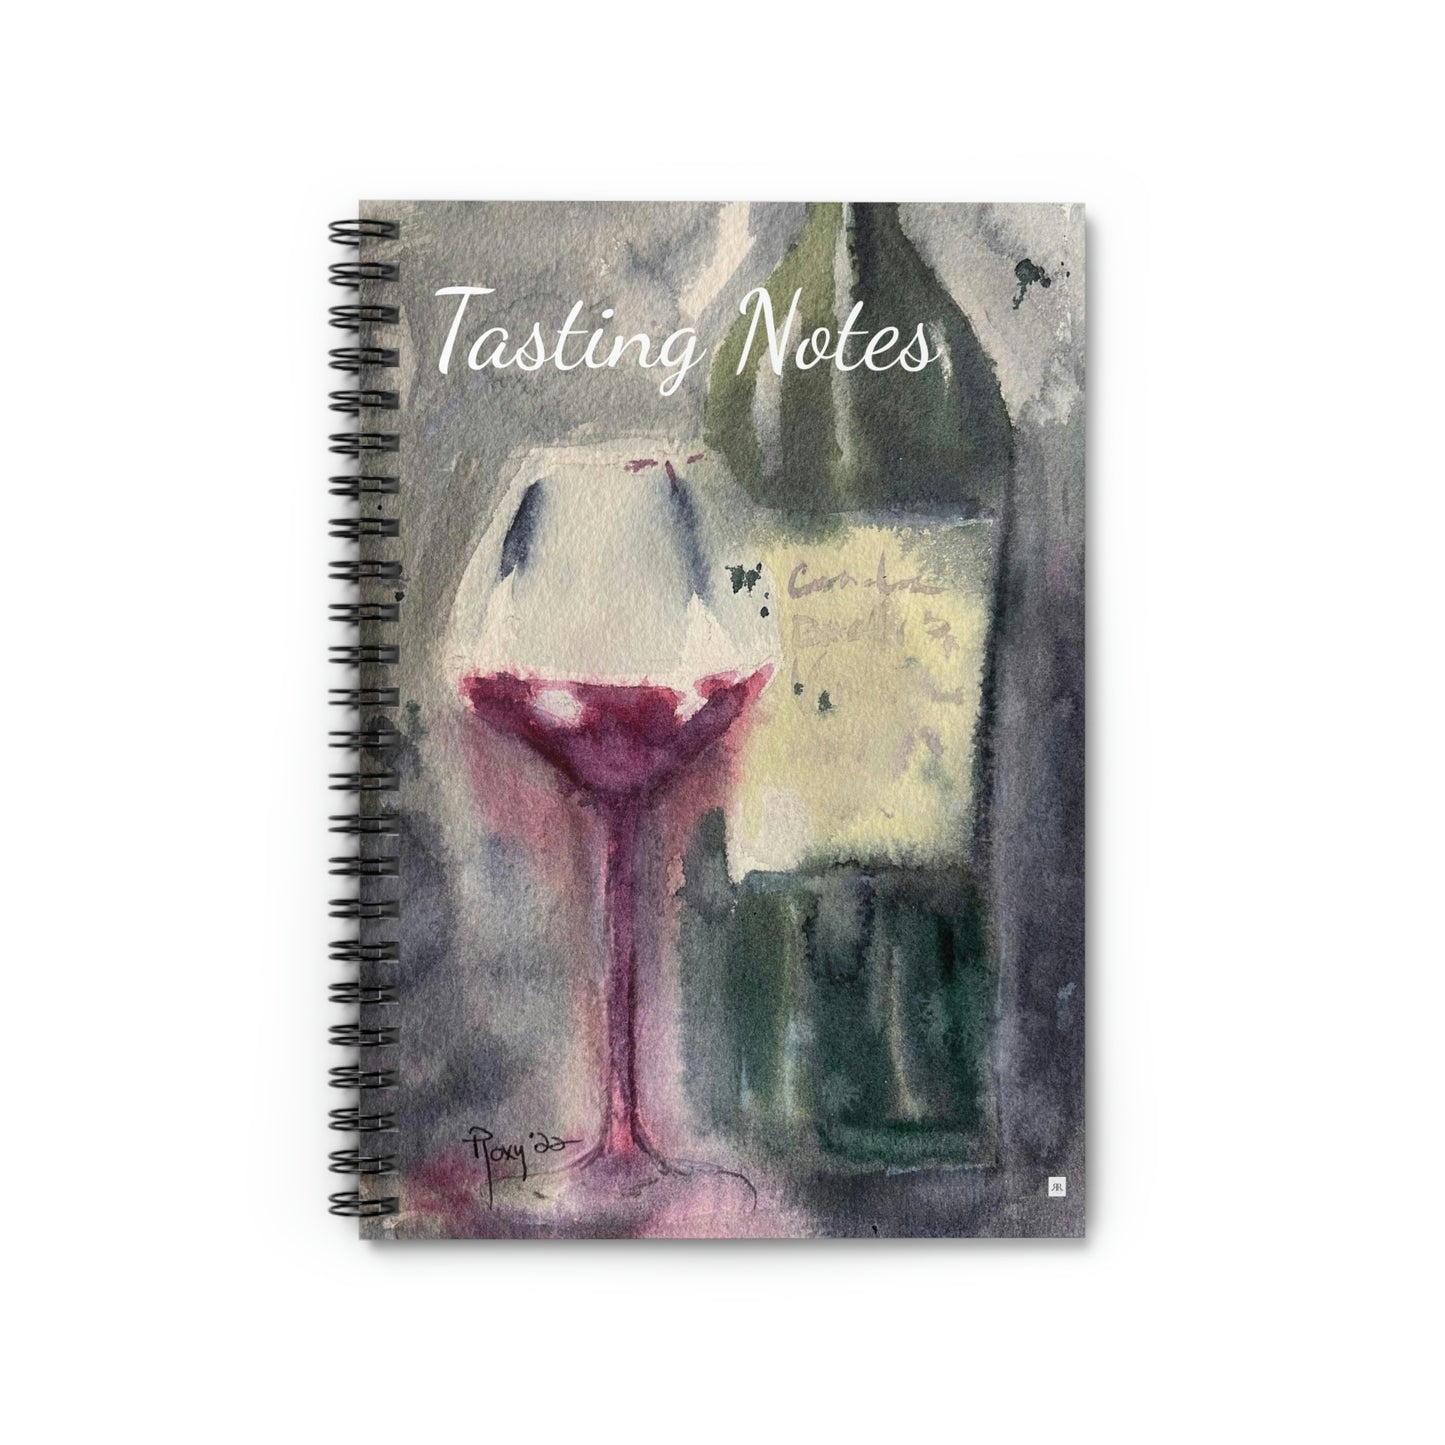 Wine Bottle and Glass "Tasting Notes" Spiral Notebook